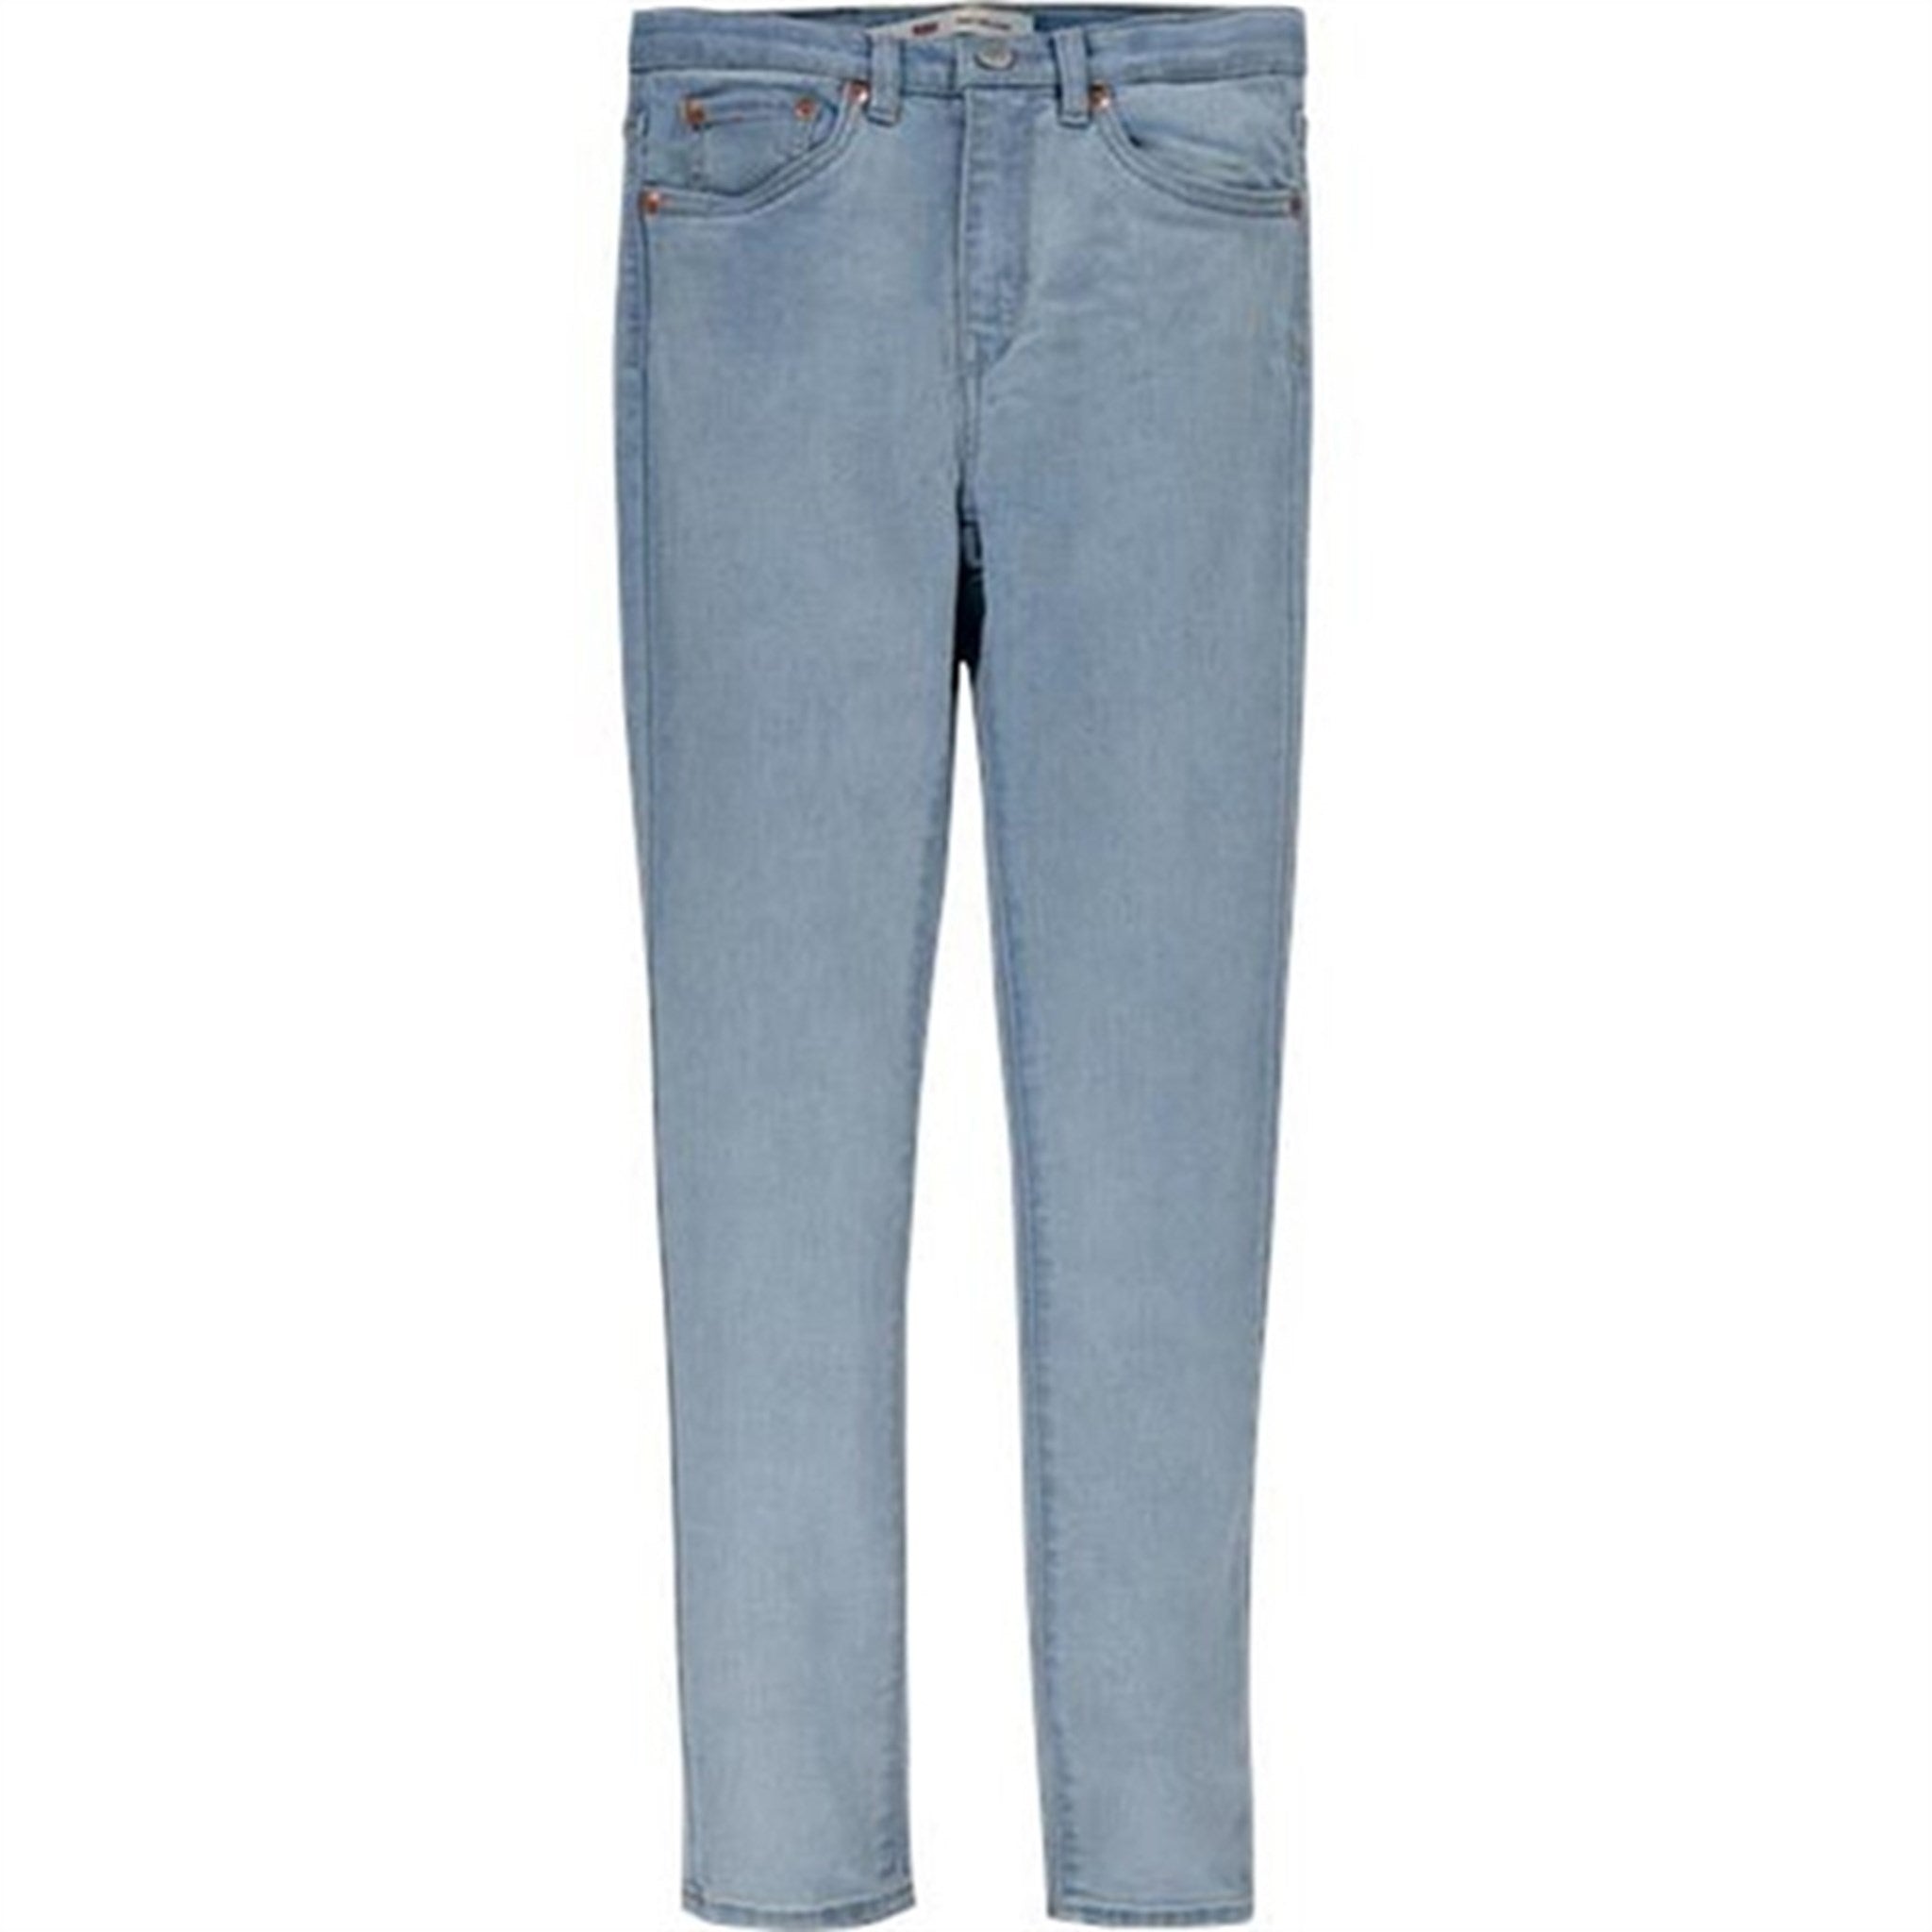 Levi's High Rise Super Skinny Jeans French Prince 2